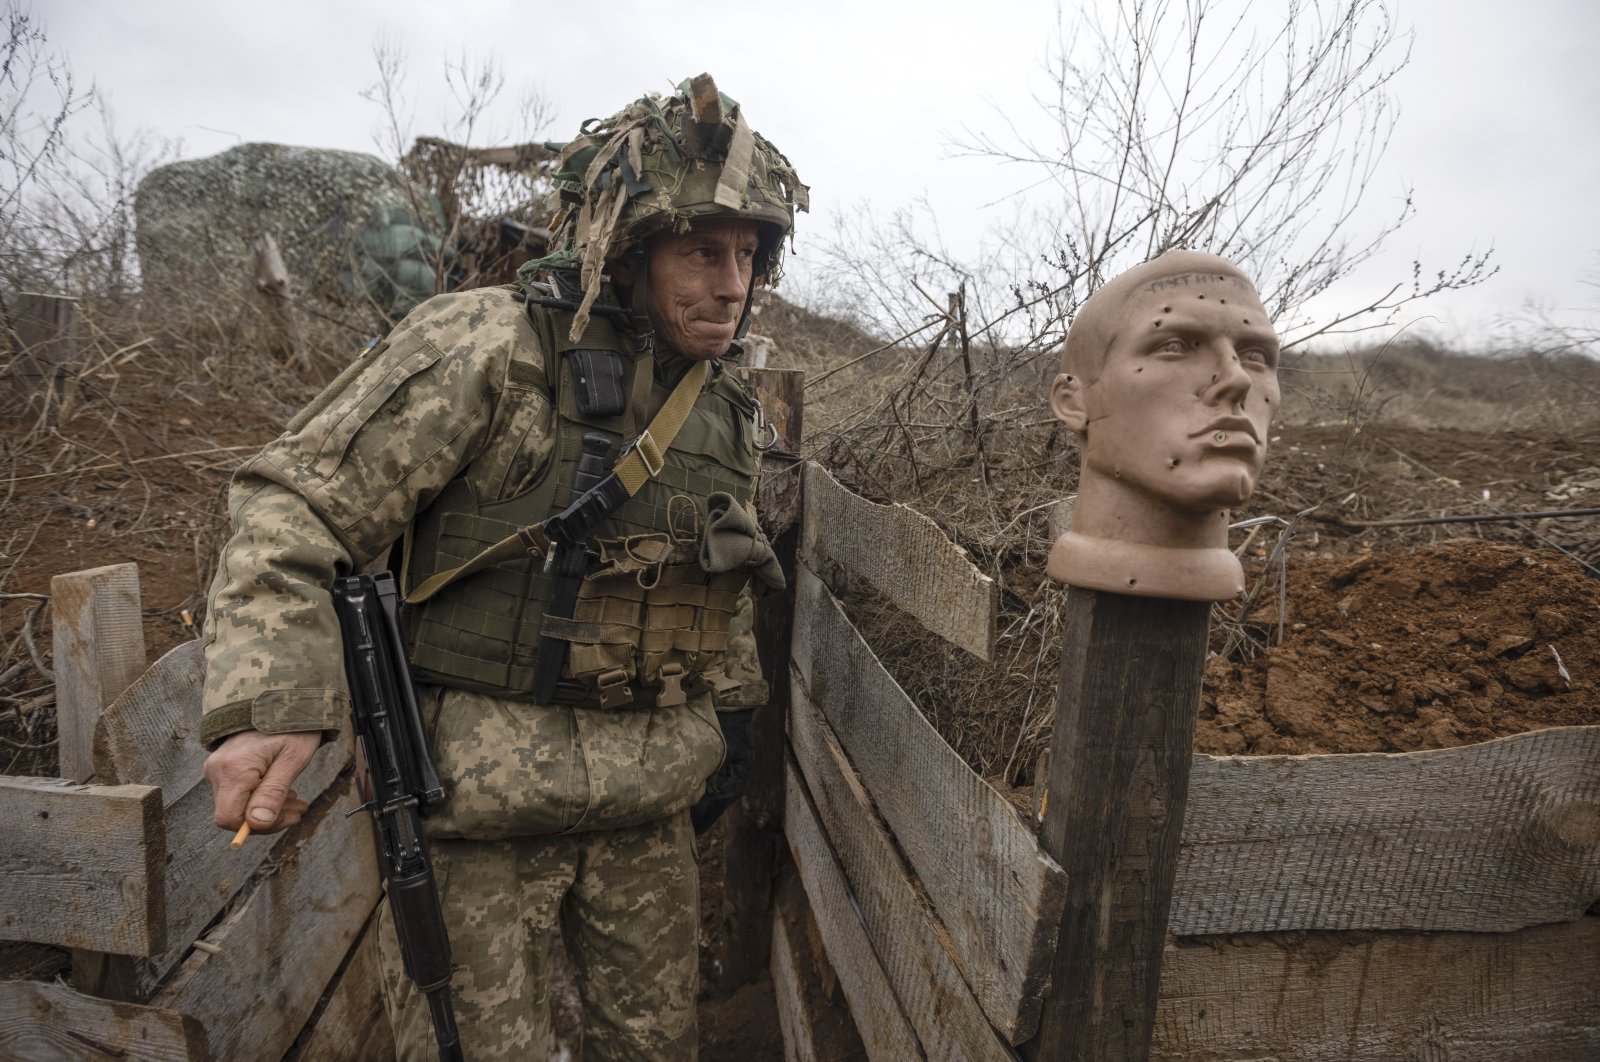 A Ukrainian soldier walks in a trench at the line of separation from pro-Russian rebels, in the Donetsk region, Ukraine, Jan. 9, 2022. (AP Photo)